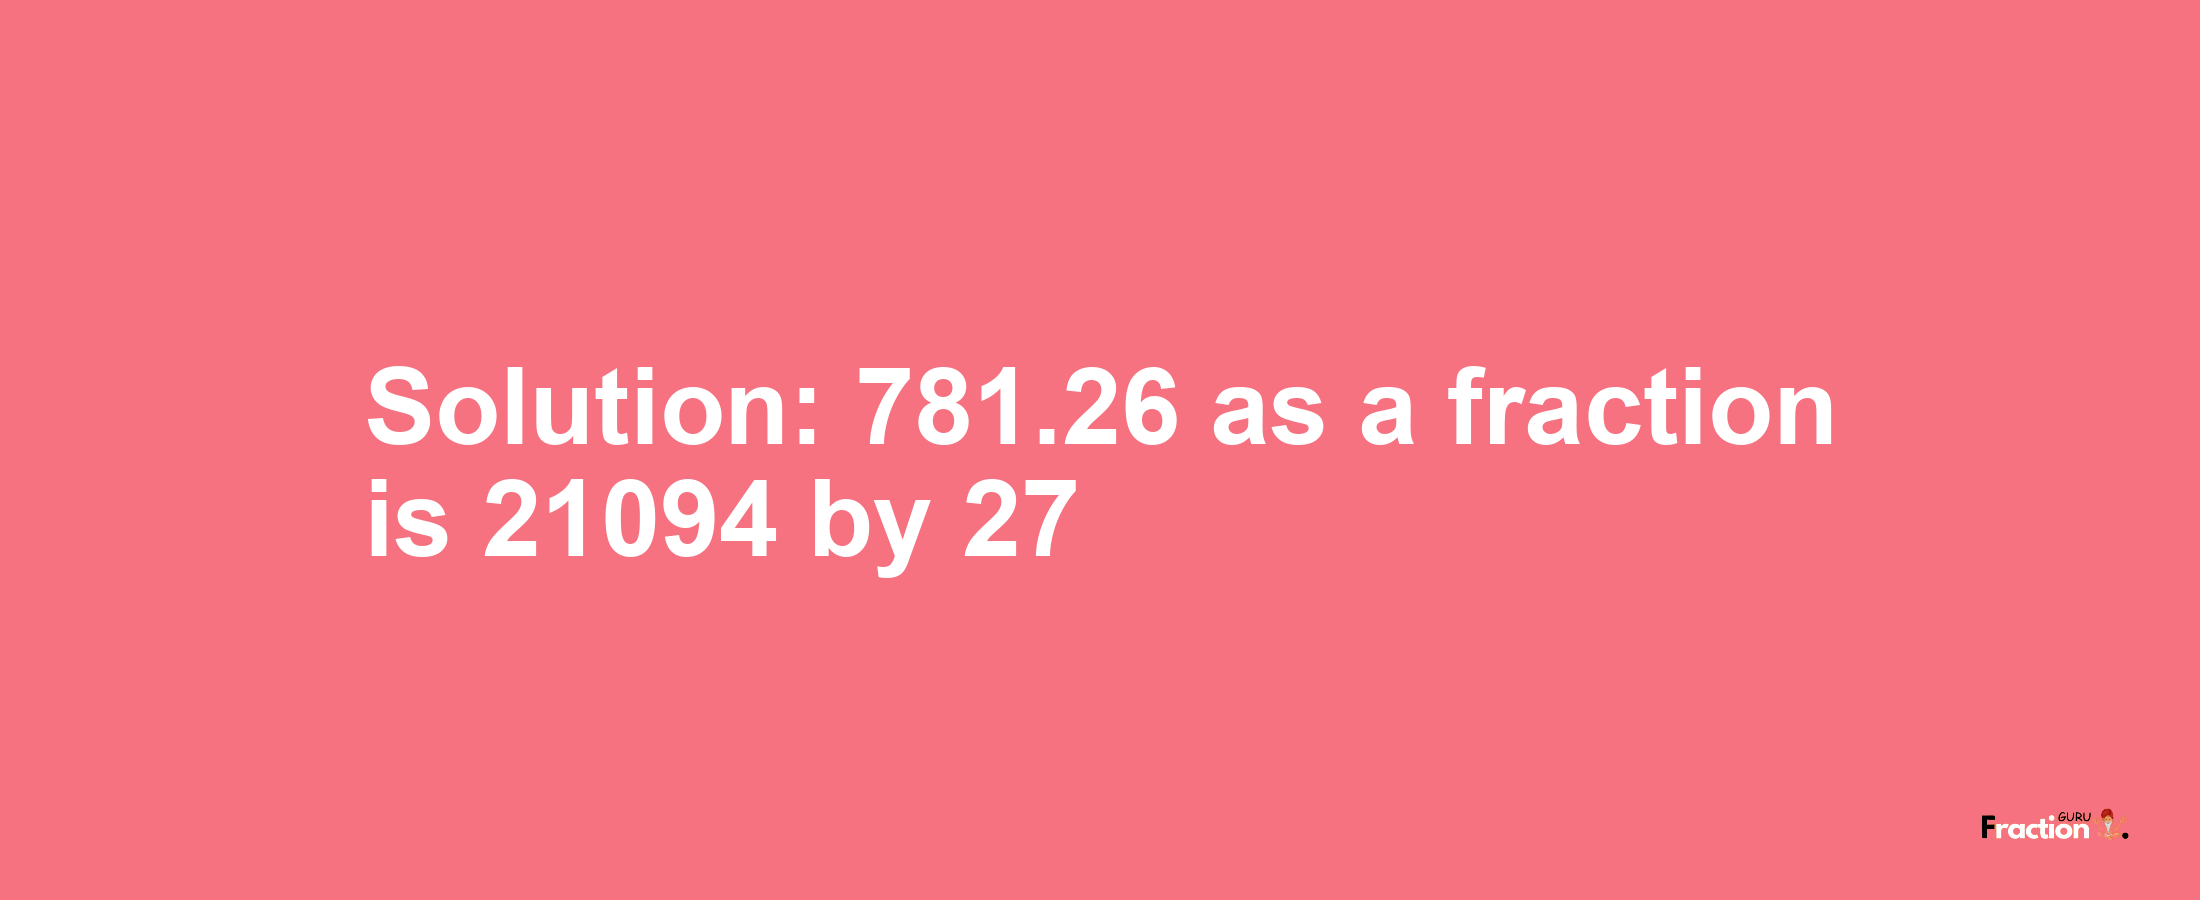 Solution:781.26 as a fraction is 21094/27